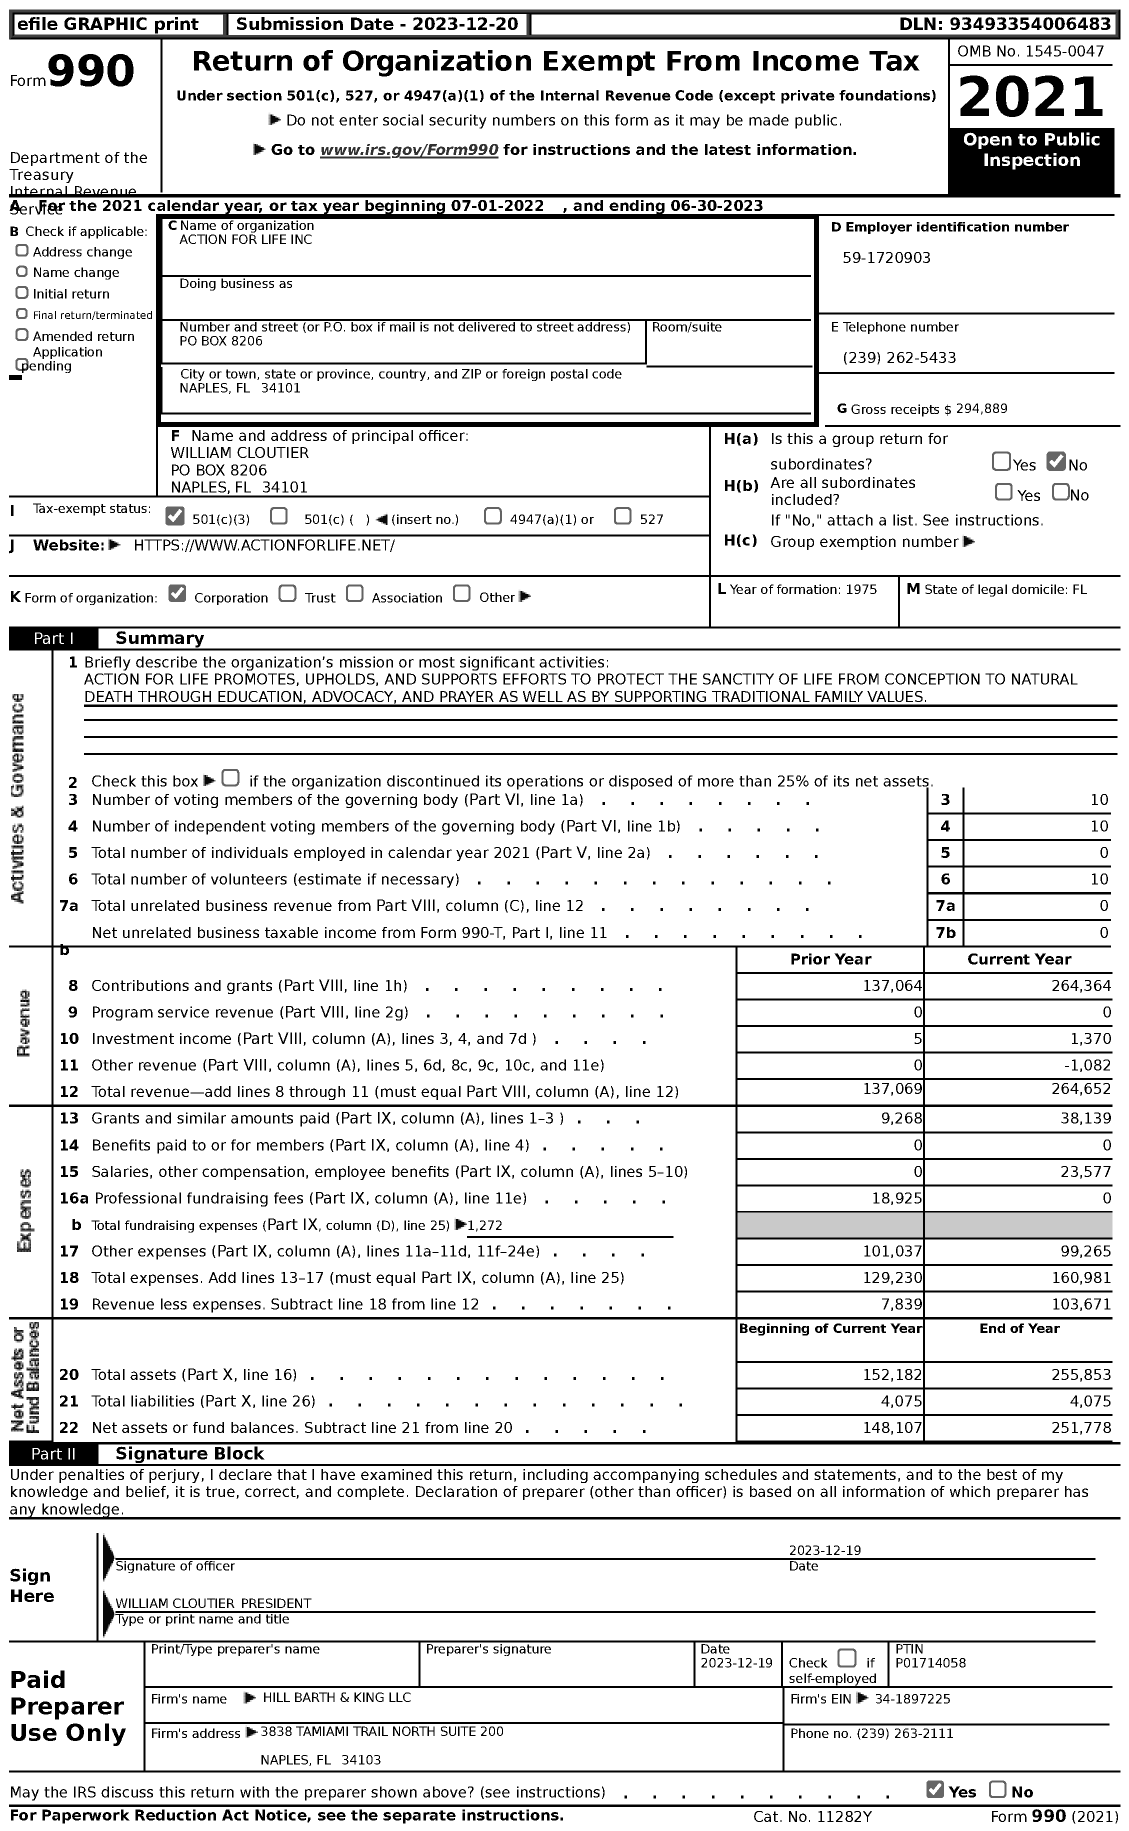 Image of first page of 2022 Form 990 for Action for Life